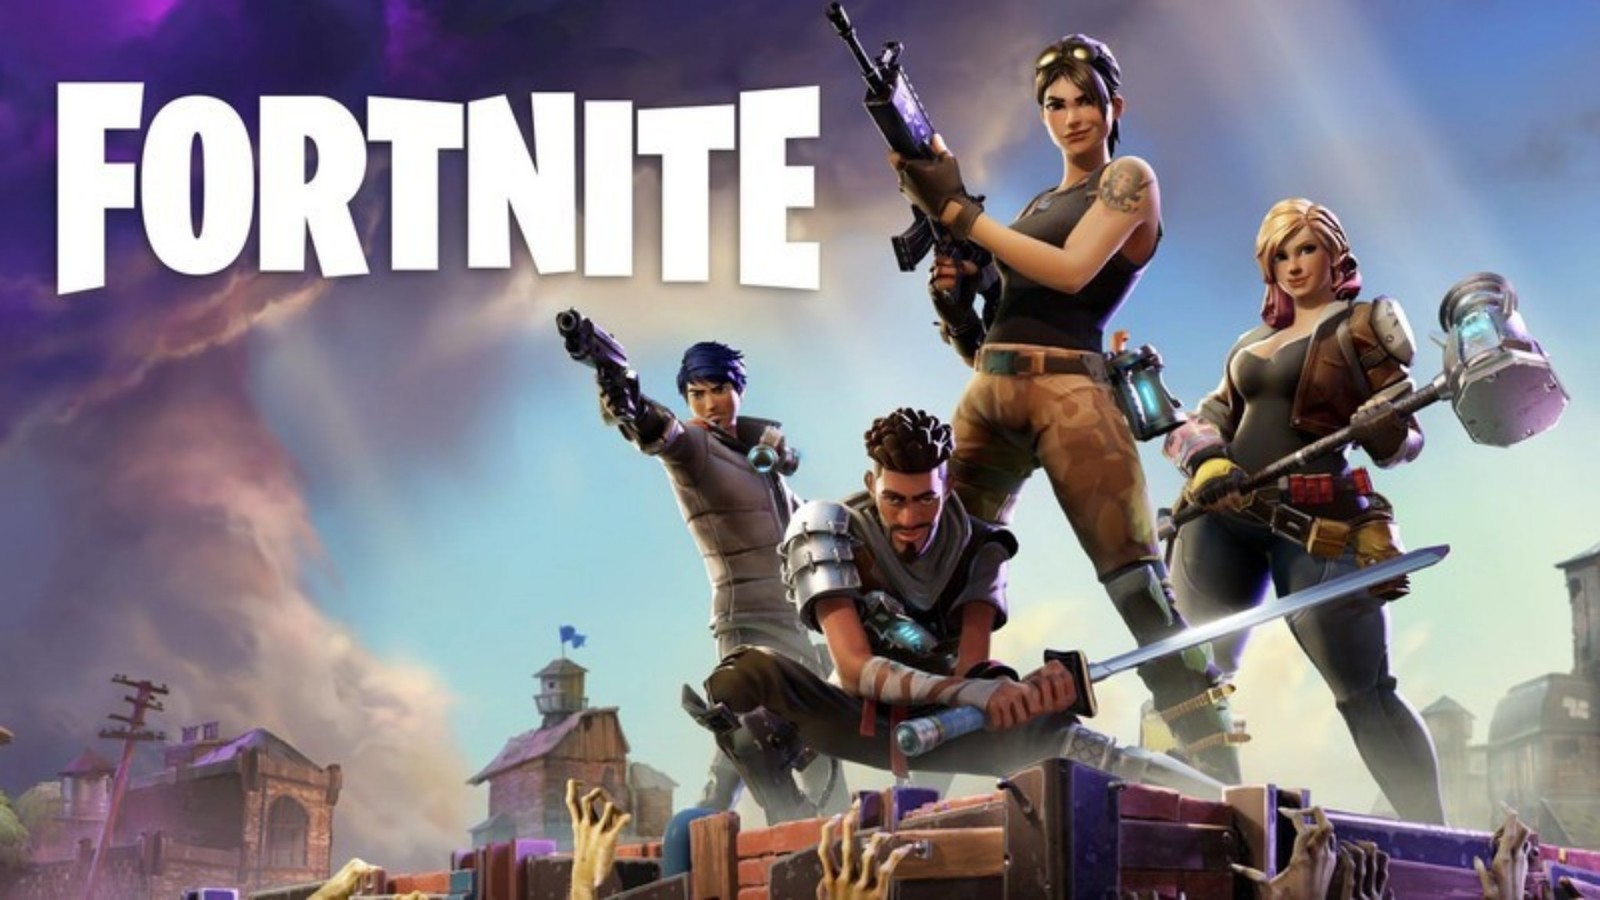 Google Play Store Now Tells You It Doesn't Have Fortnite